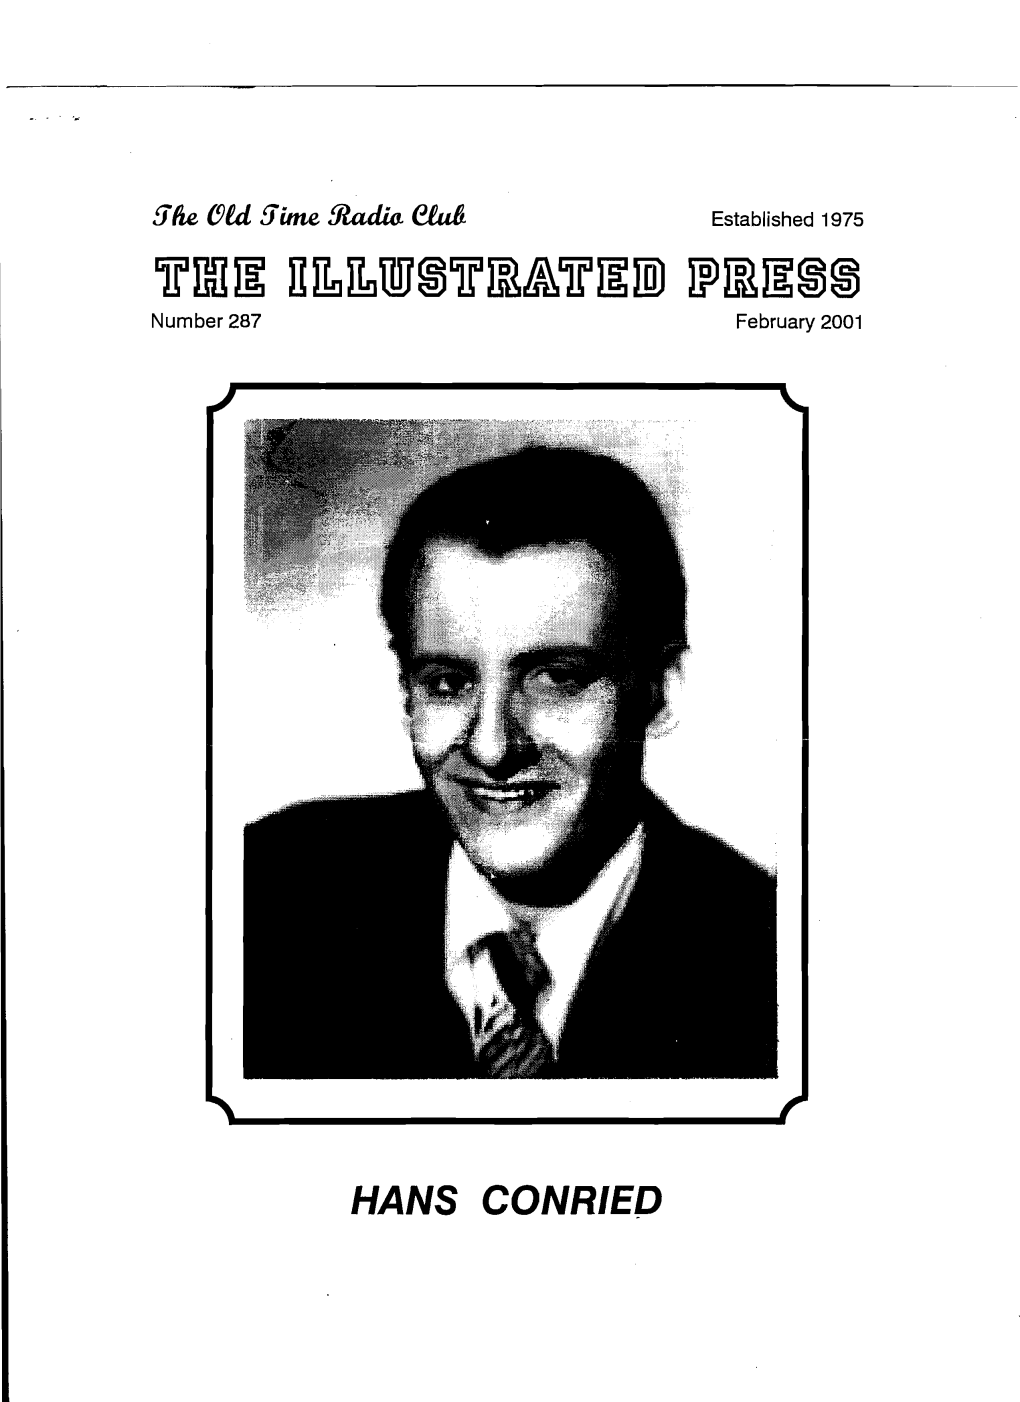 HANS CONRIEO Publication of the Old Time Radio Club